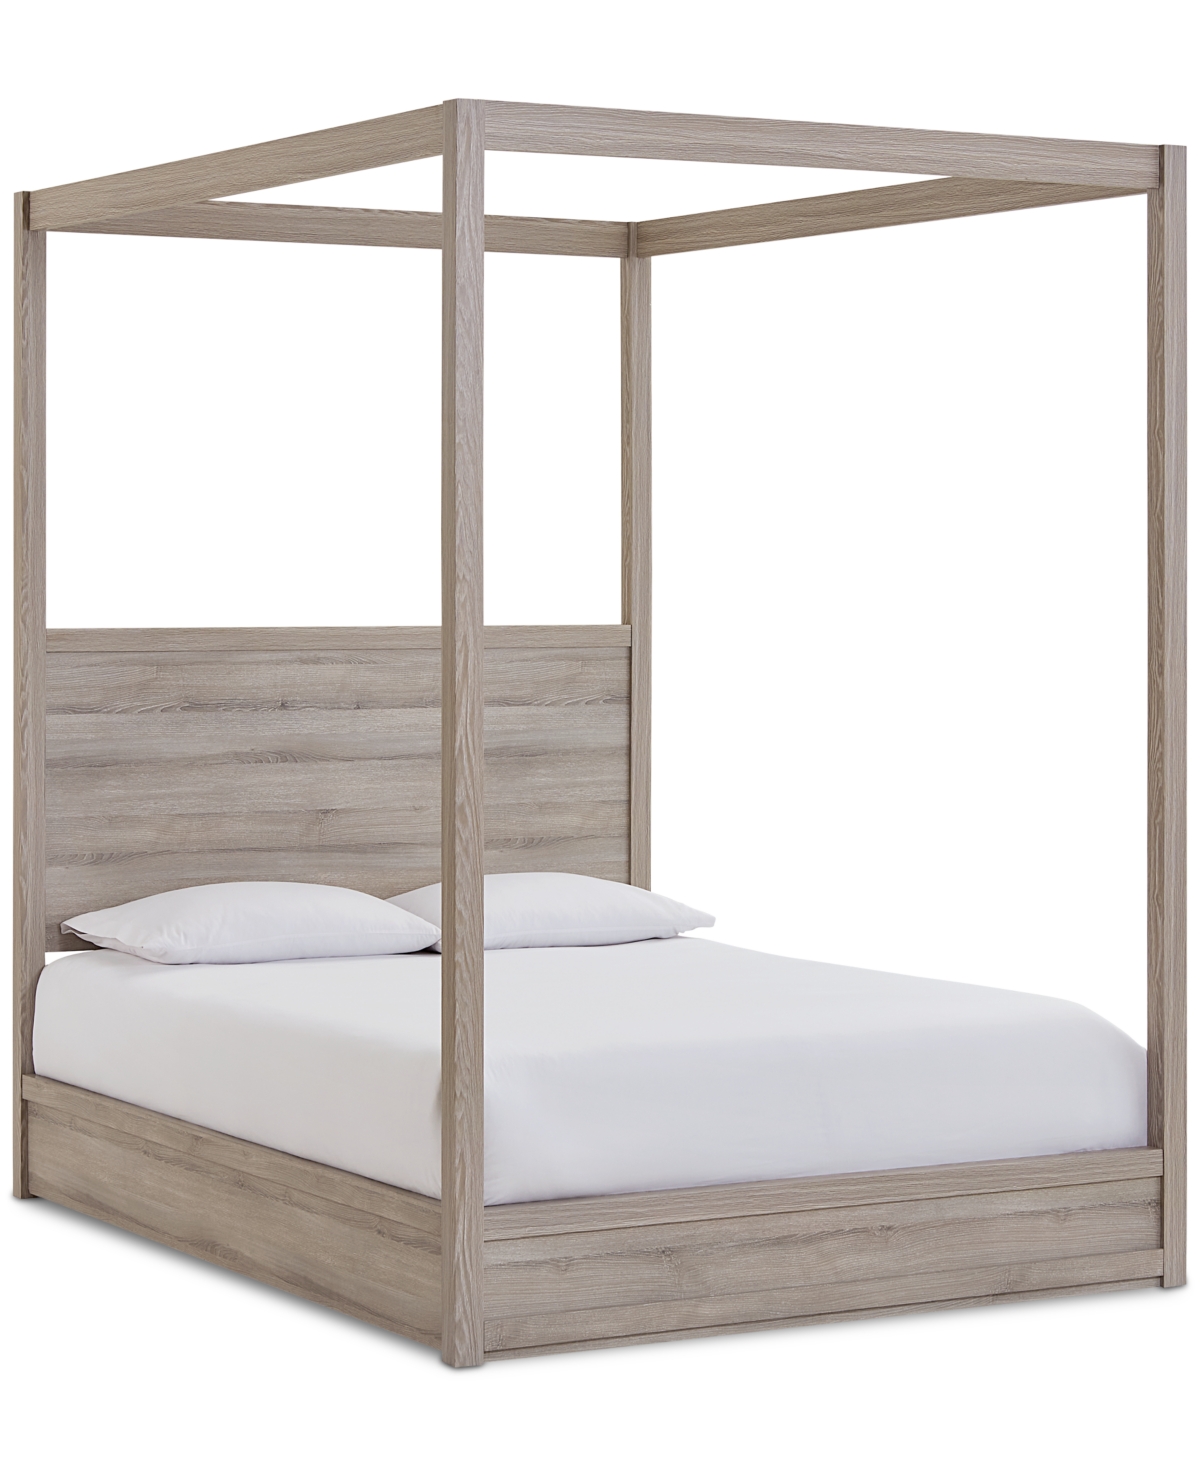 Furniture Makson Laminate Queen Bed In Light Grey